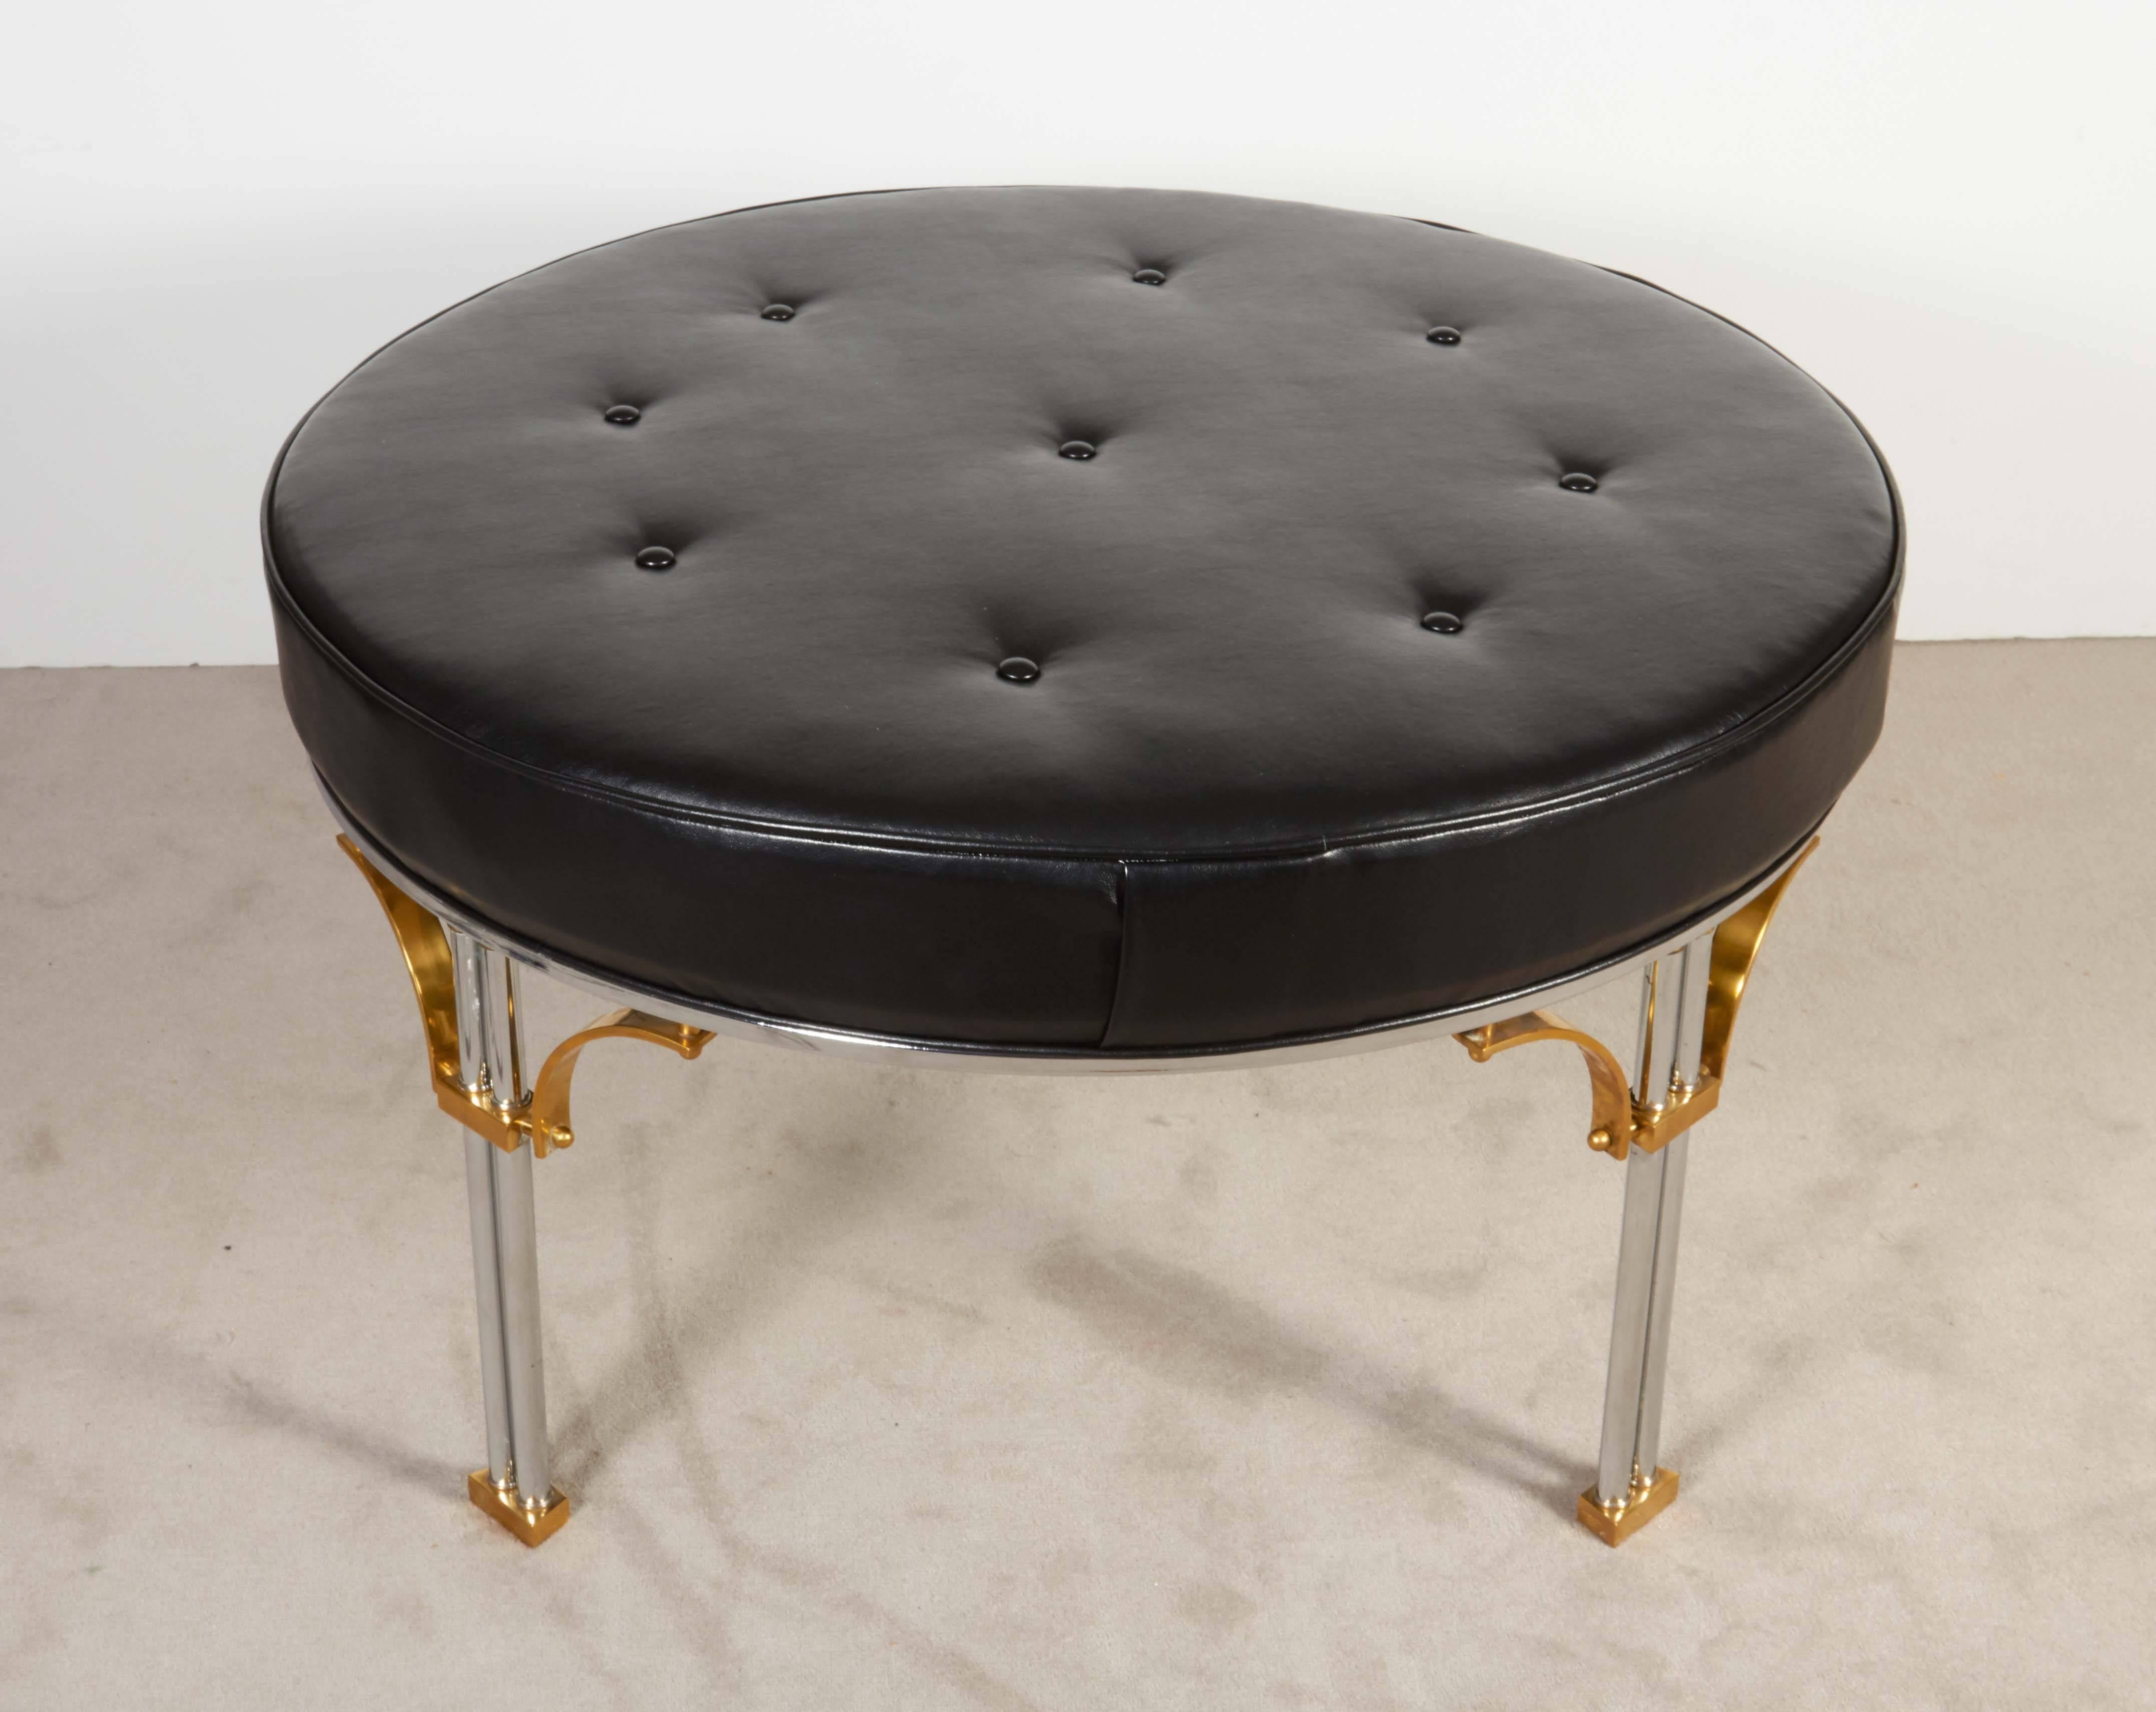 An ottoman by Maison Jansen, produced in France circa 1960s, with round seat in button tufted black faux leather, raised on four dual legs in chrome over steel, with brass accents. Very good vintage condition, consistent with age, newly